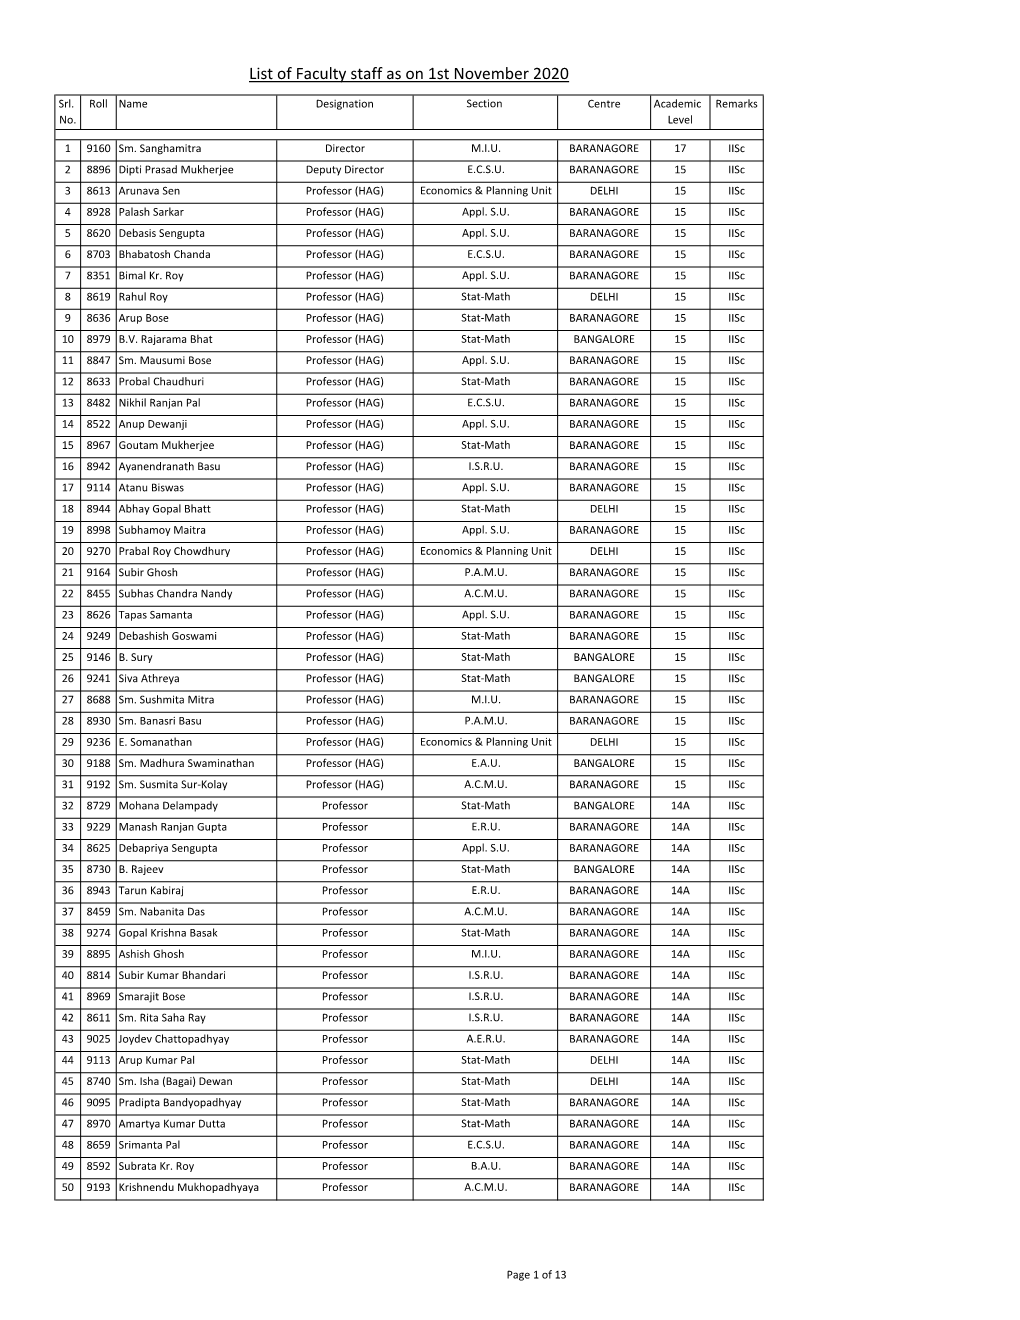 List of Faculty Staff As on 1St November 2020